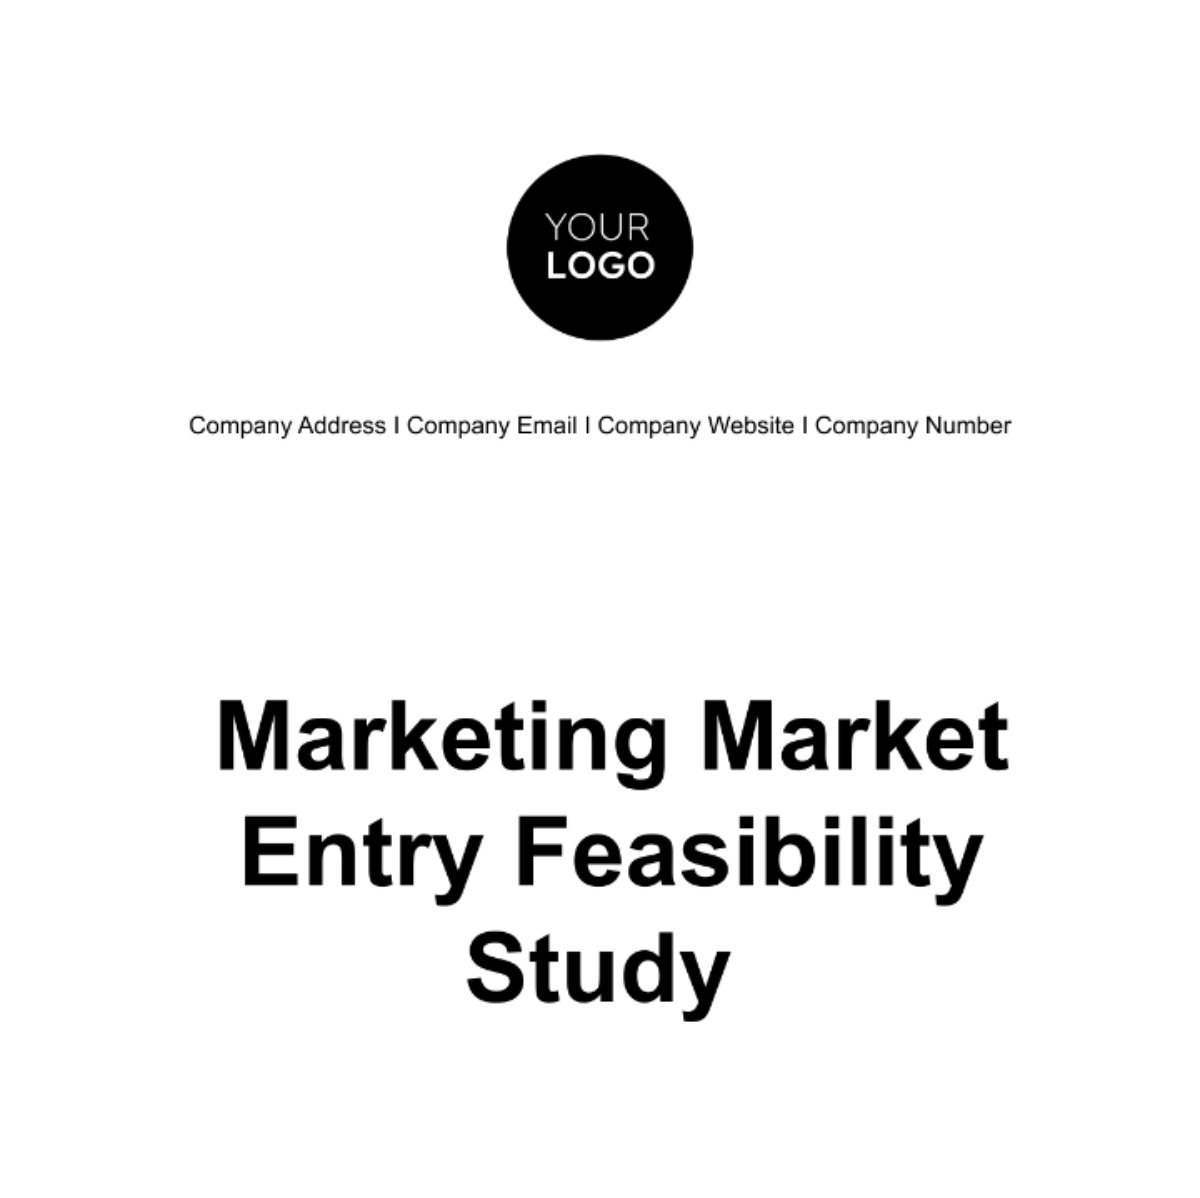 Marketing Market Entry Feasibility Study Template